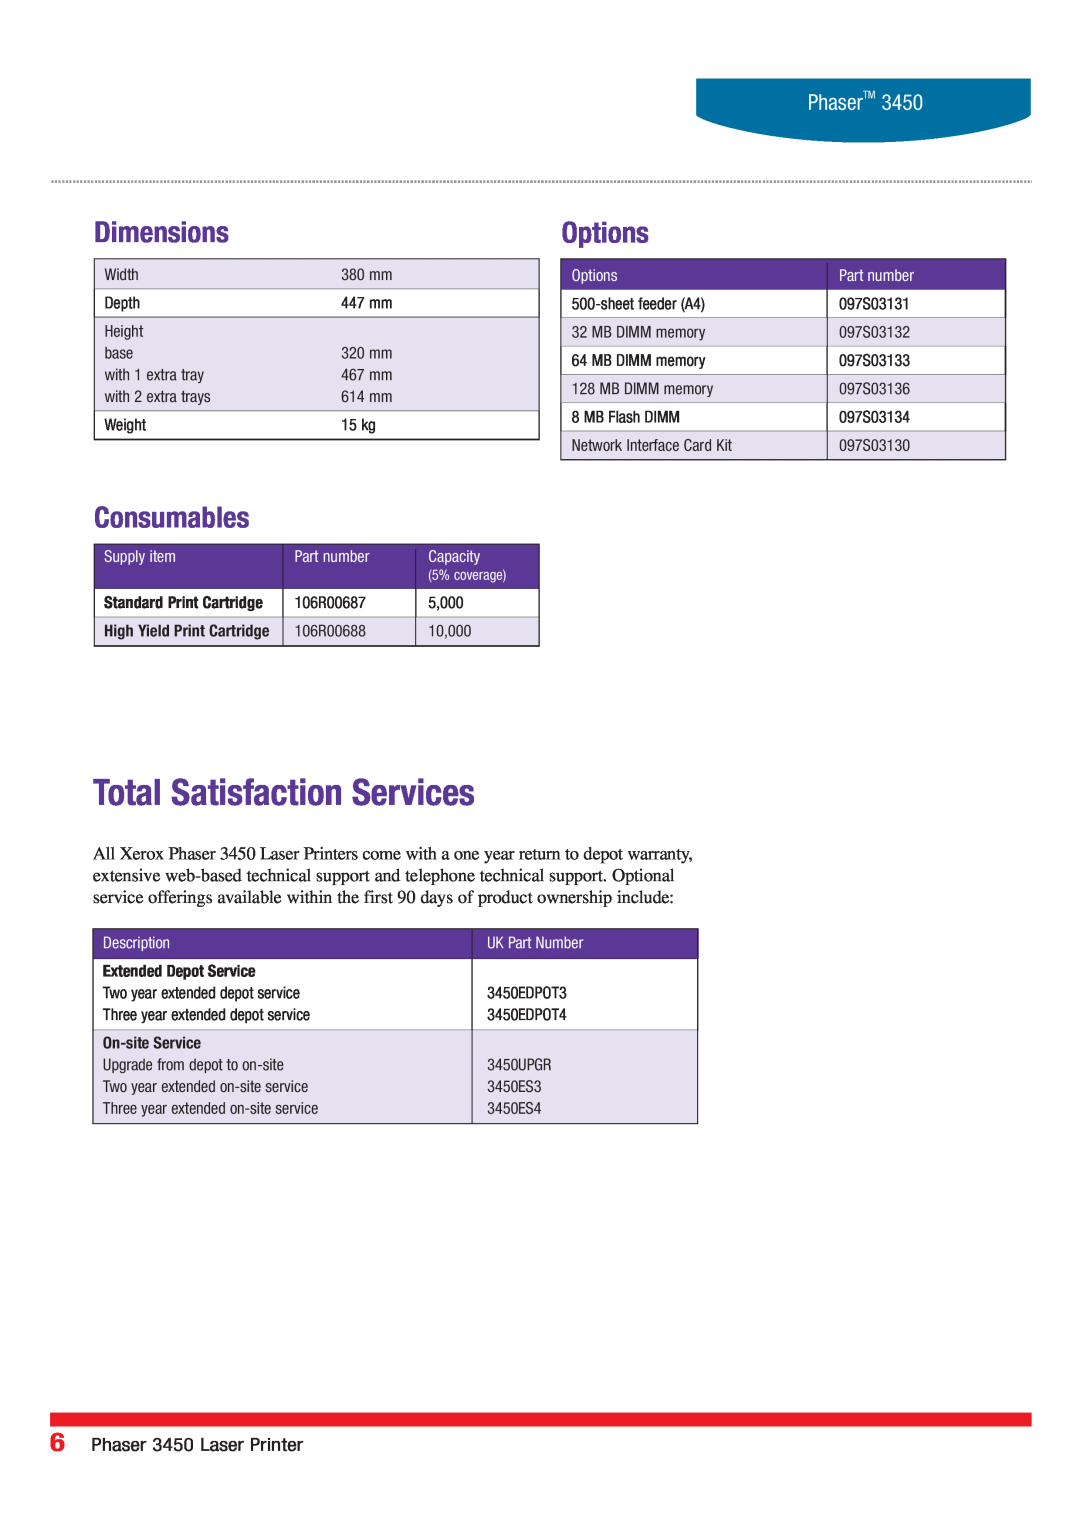 Xerox Total Satisfaction Services, Dimensions, Options, Consumables, Phaser 3450 Laser Printer, PhaserTM, Part number 